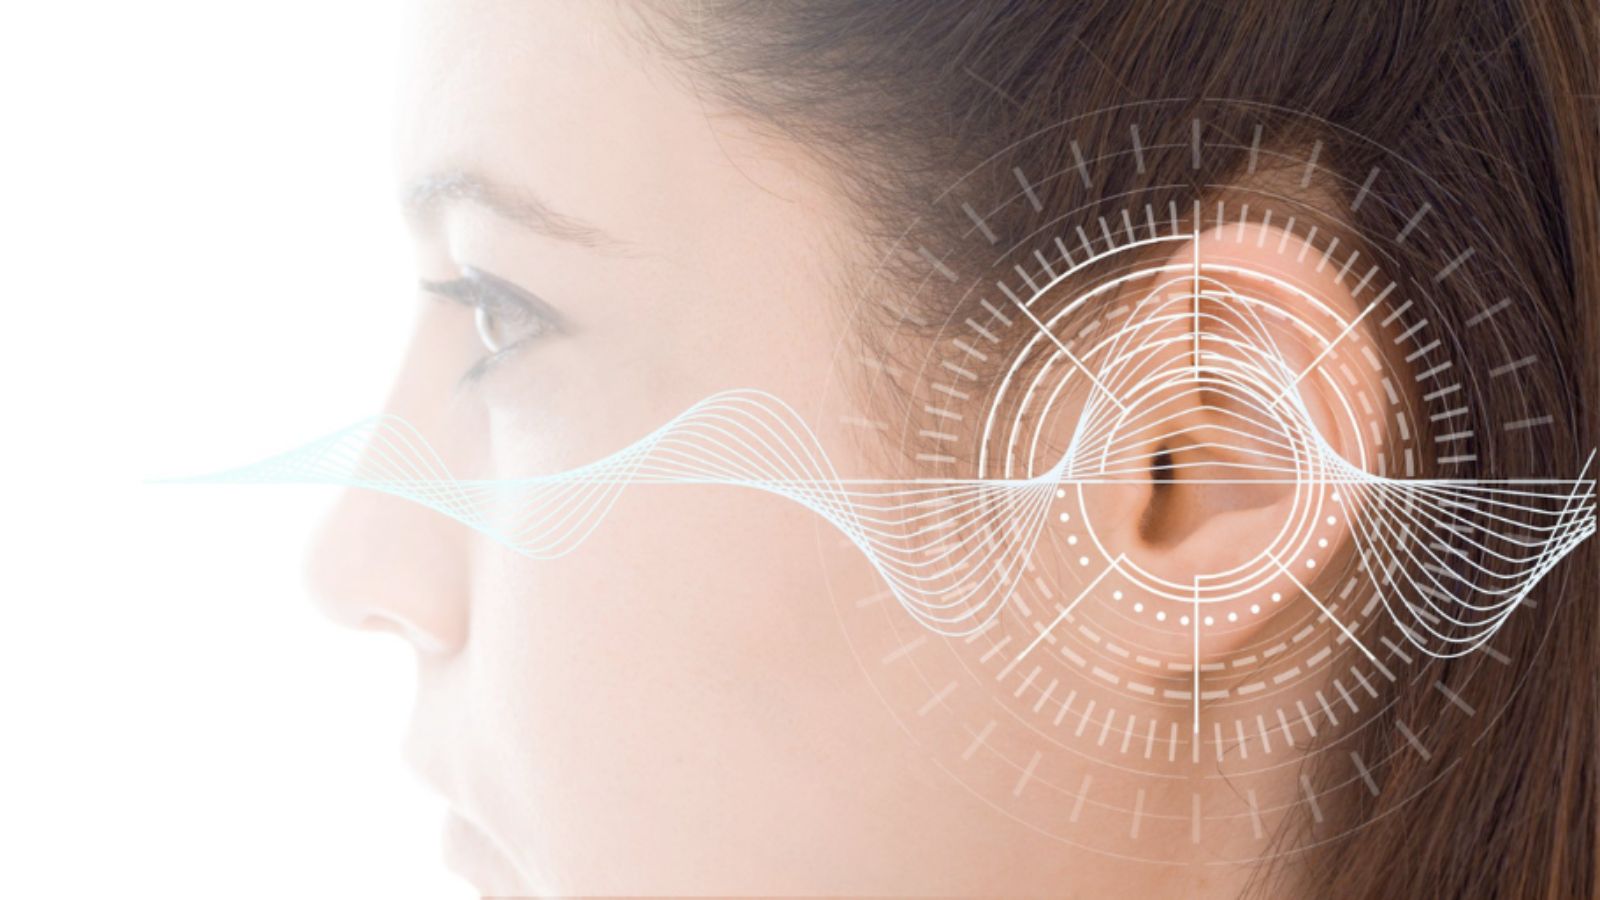 We’re All Ears: 3D-Printed Spock Ears, mass personalization